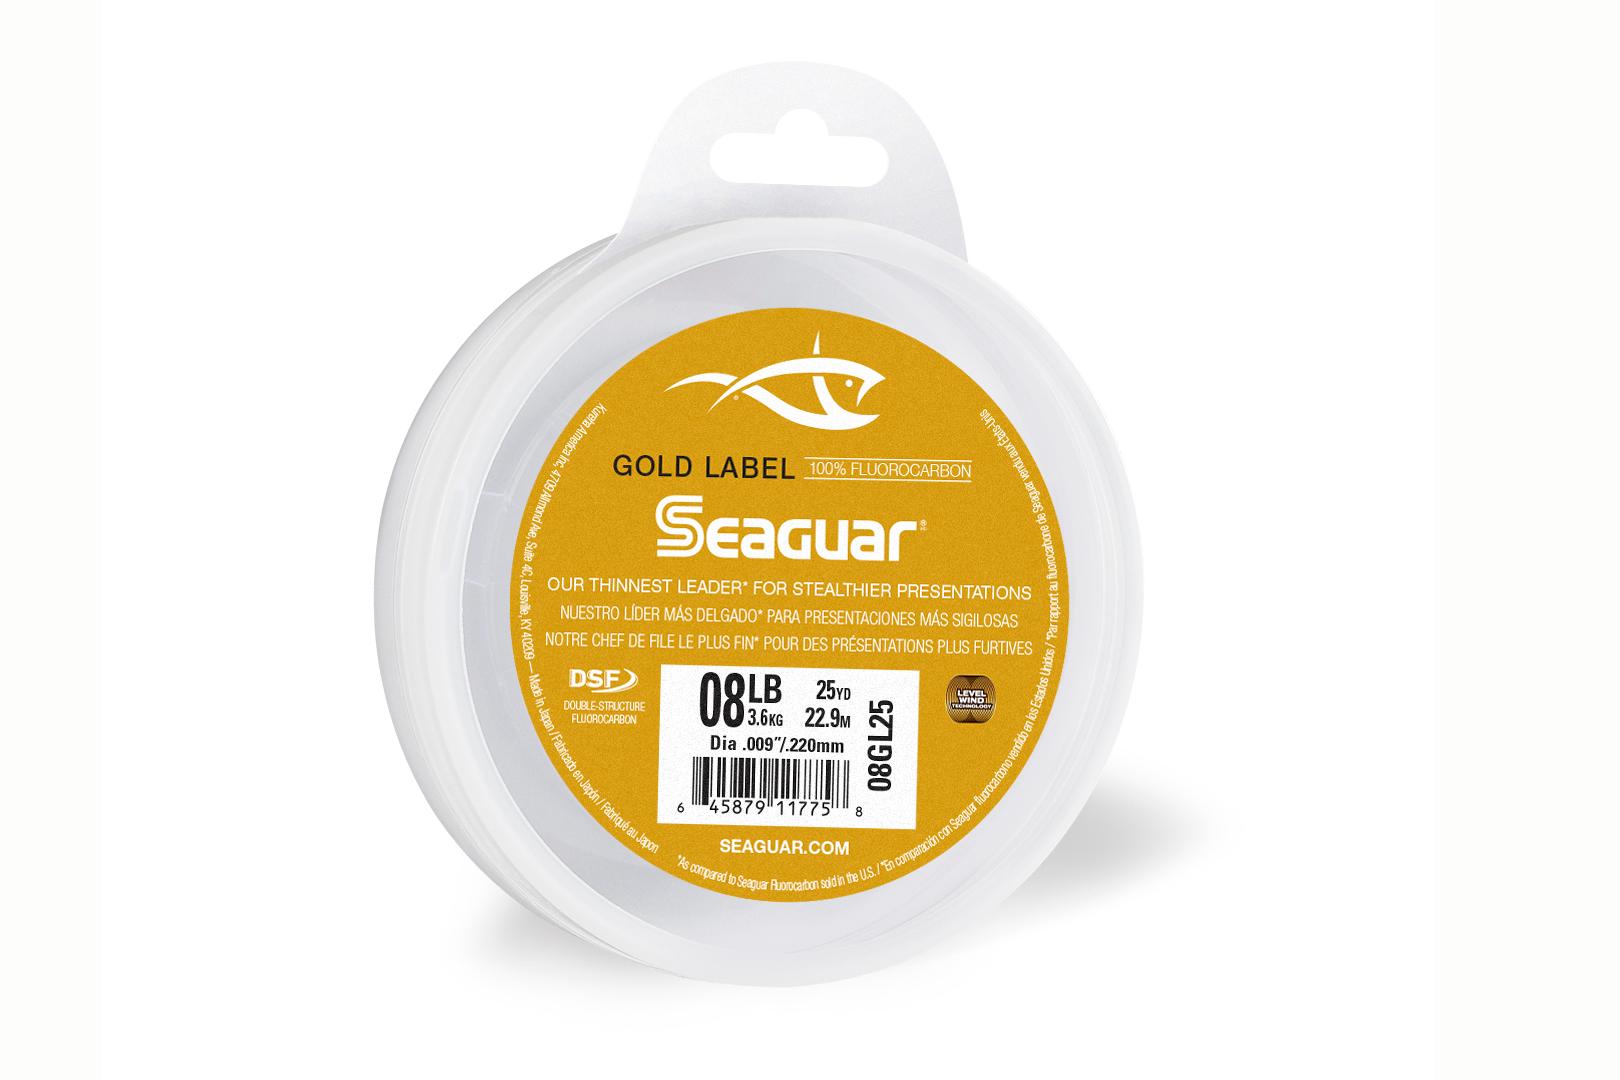 <p><b>Seaguar Gold Label Leader</b></p>
<p>Seaguar, the inventor of fluorocarbon fishing lines, introduces Gold Label- our thinnest and strongest leader material for stealthier presentations. Not only are thinner leaders even less visible underwater, but anglers also get the advantage of more natural presentations and better catch-rates on finicky fish. Made with Seaguarâs exclusive double-structure process, it combines two custom Seaguar fluorocarbon resins to create a leader with smaller diameters yet with exceptional knot and tensile strength. Itâs softer too and cinches easily for fail-safe knots. Now available in 2-pound test to 12-pound test, on 25-yard spools.  </p>
<p><a href=